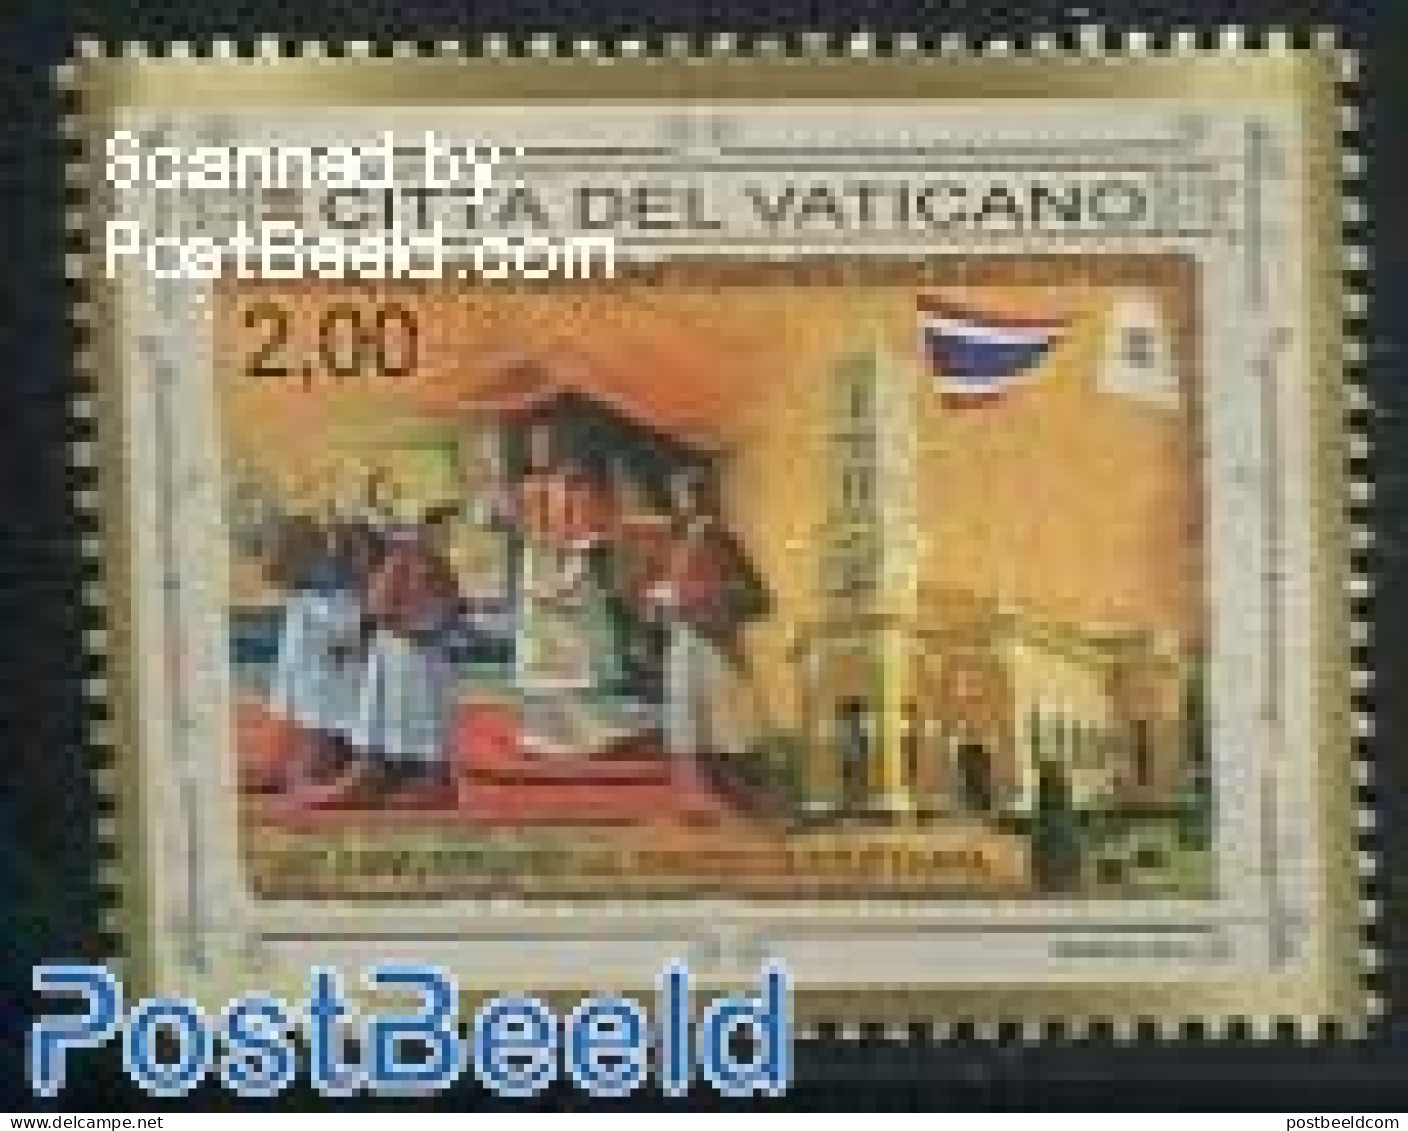 Vatican 2014 Synode Of Ayutthaya 1v, Joint Issue Thailand, Mint NH, Religion - Various - Churches, Temples, Mosques, S.. - Unused Stamps